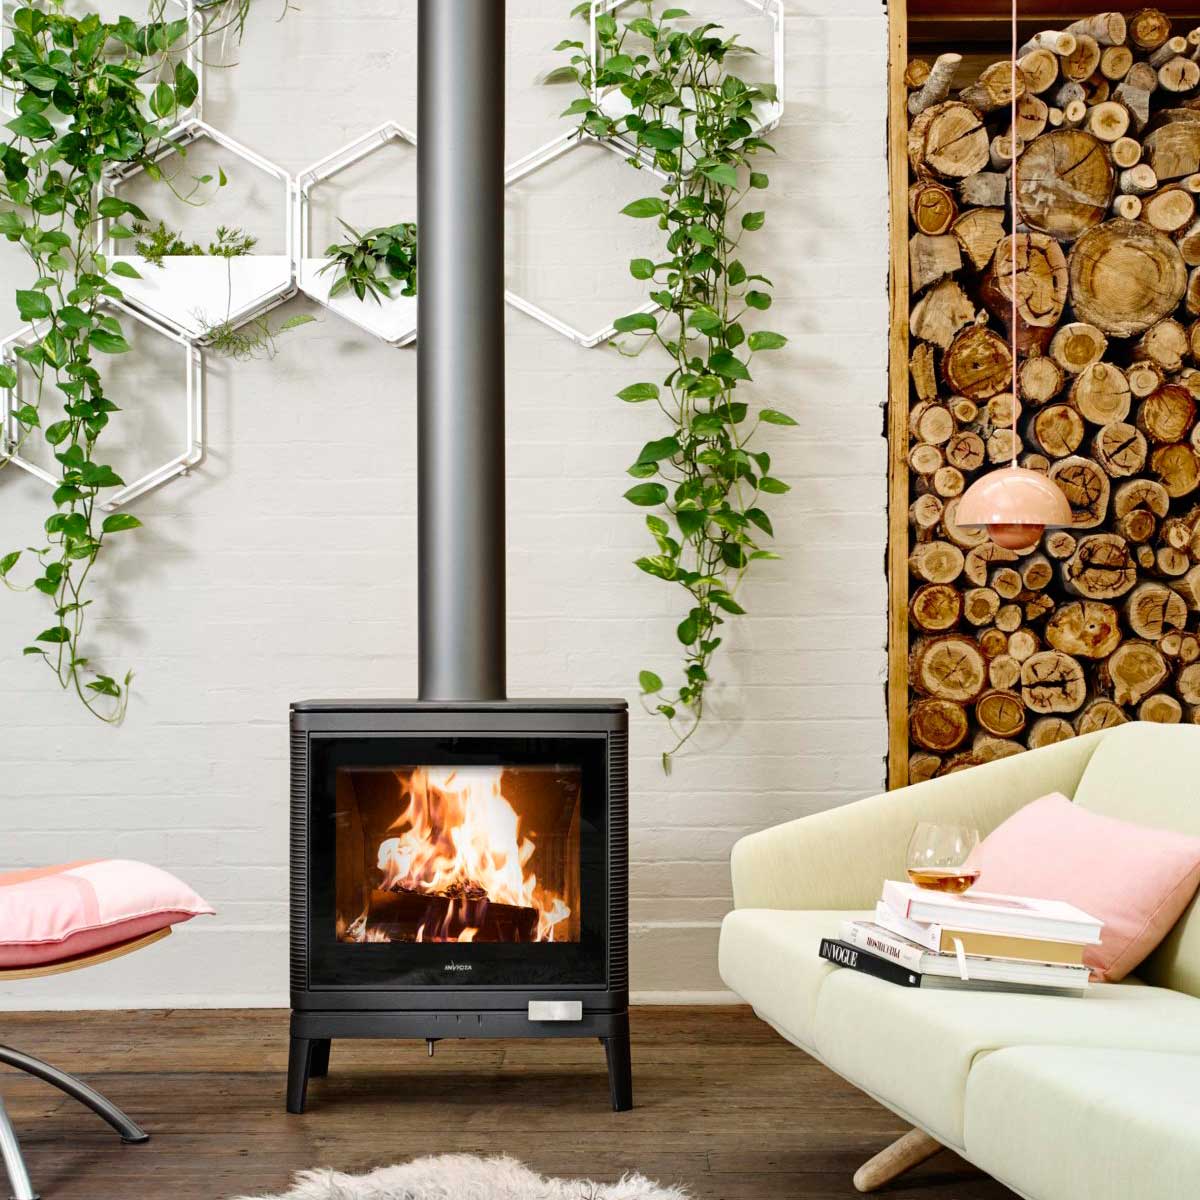 Invicta Kazan wood heater in beautiful interior setting with contemporary white lounge, pink cushions and lush indoor plants